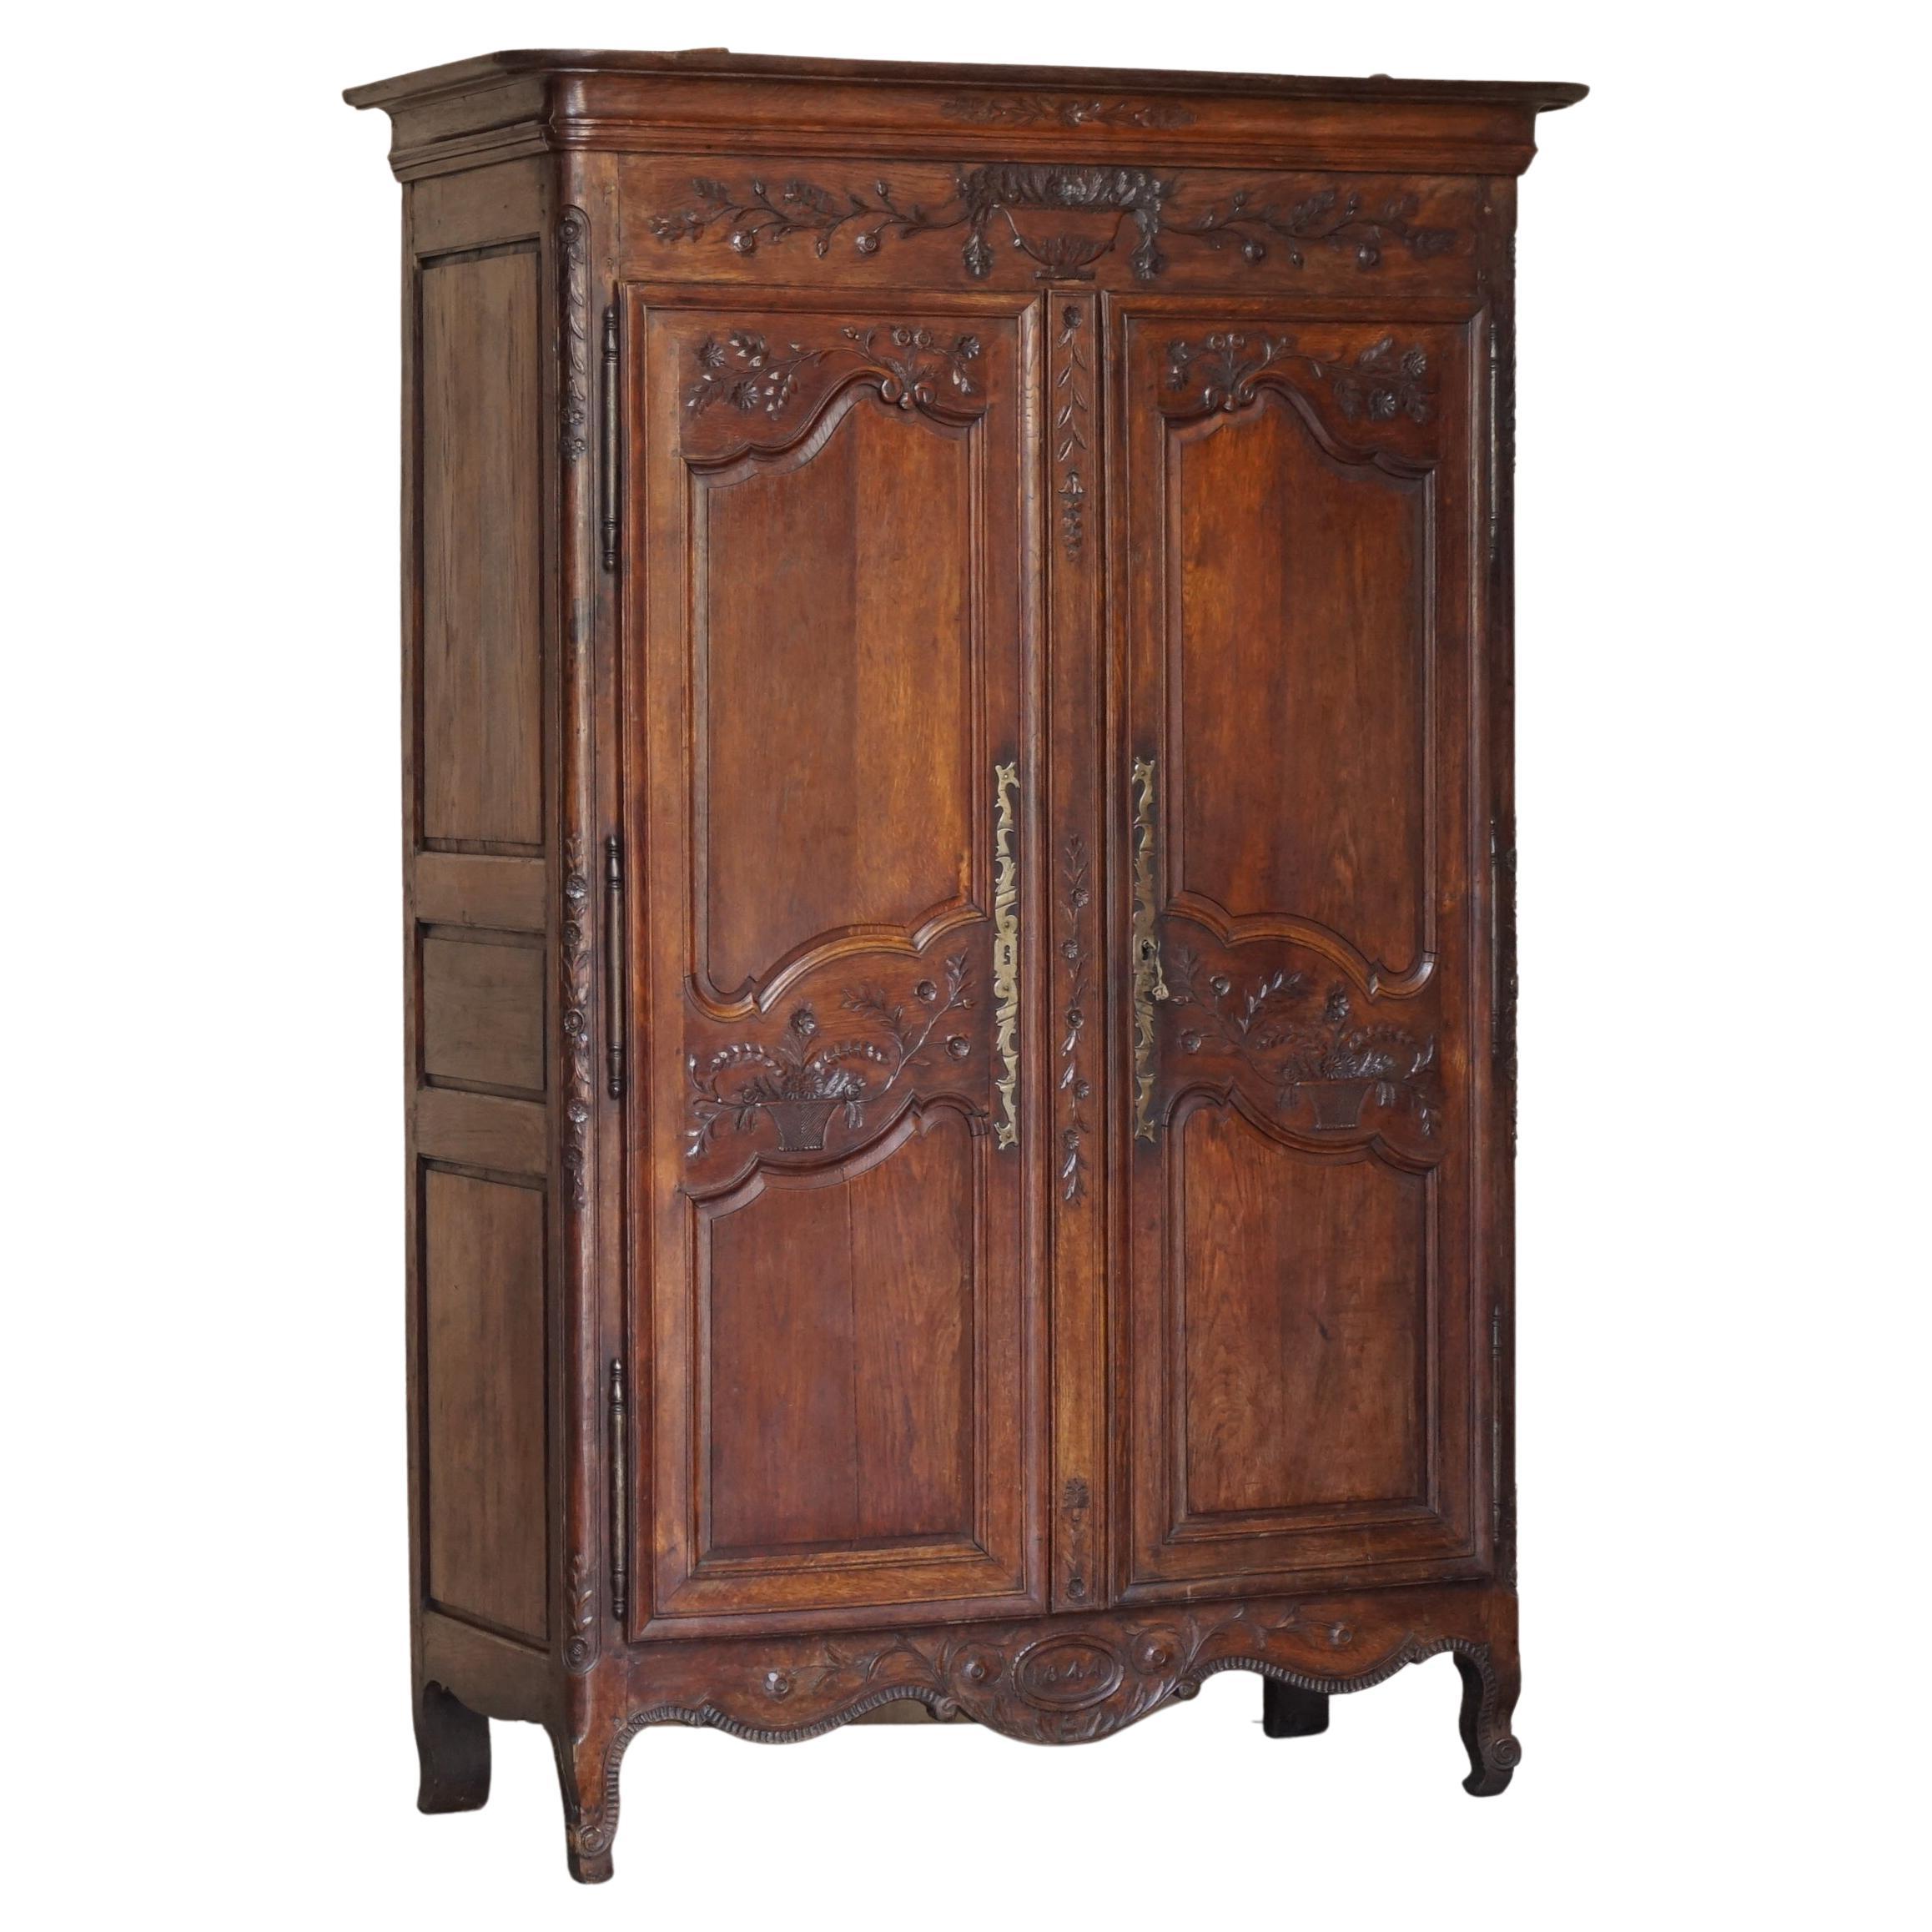 Antique 1844 Carved & Dated Large Wardrobe Armoire with Expertly Crafted Panels For Sale